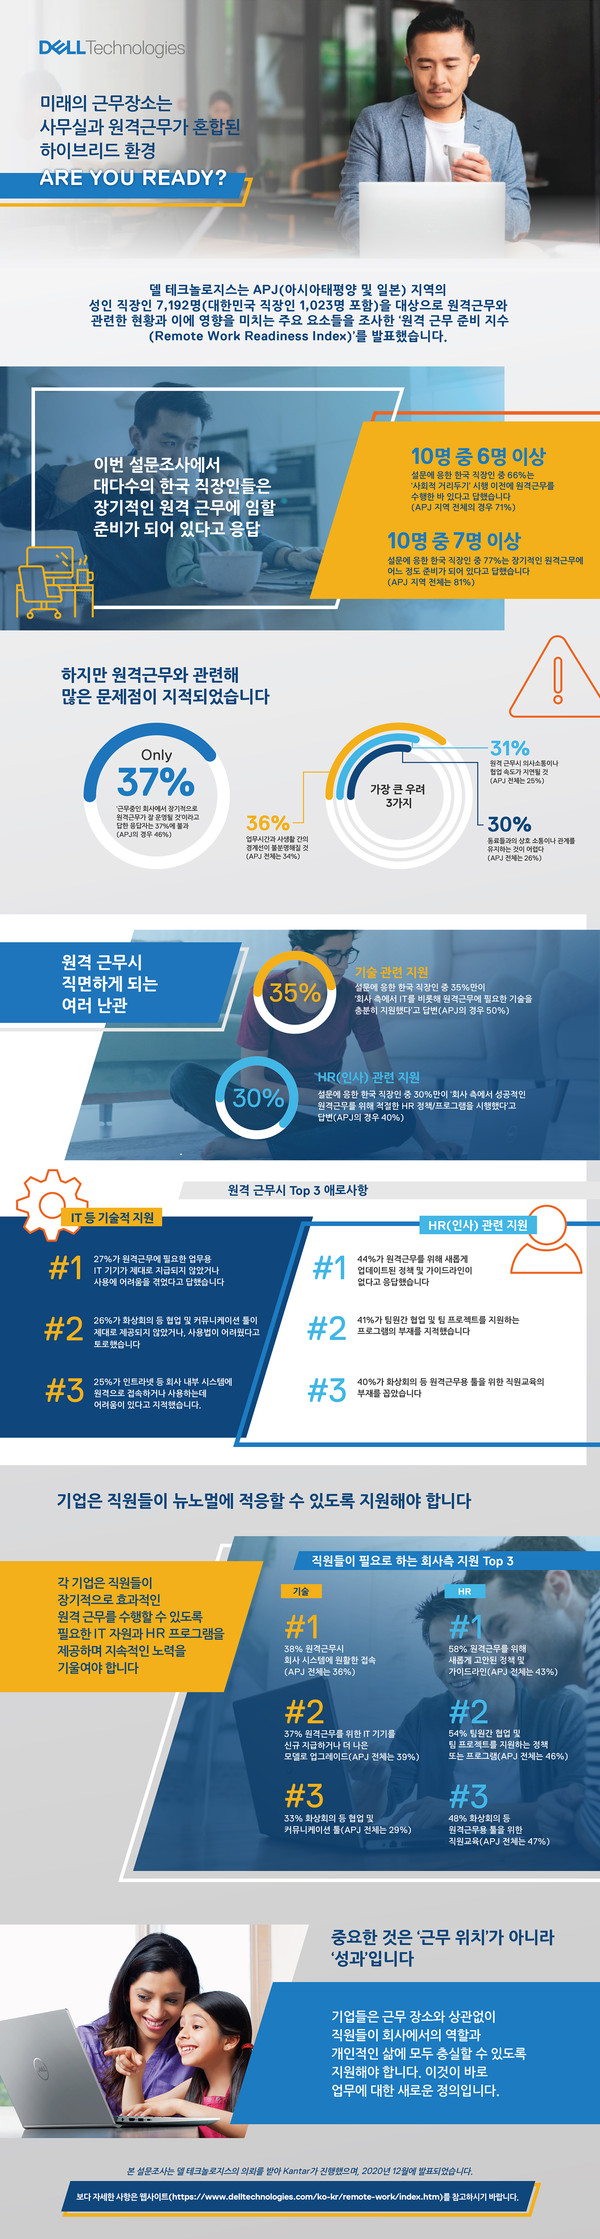 Dell RWR Index Infographic [사진=델 테크놀로지스]